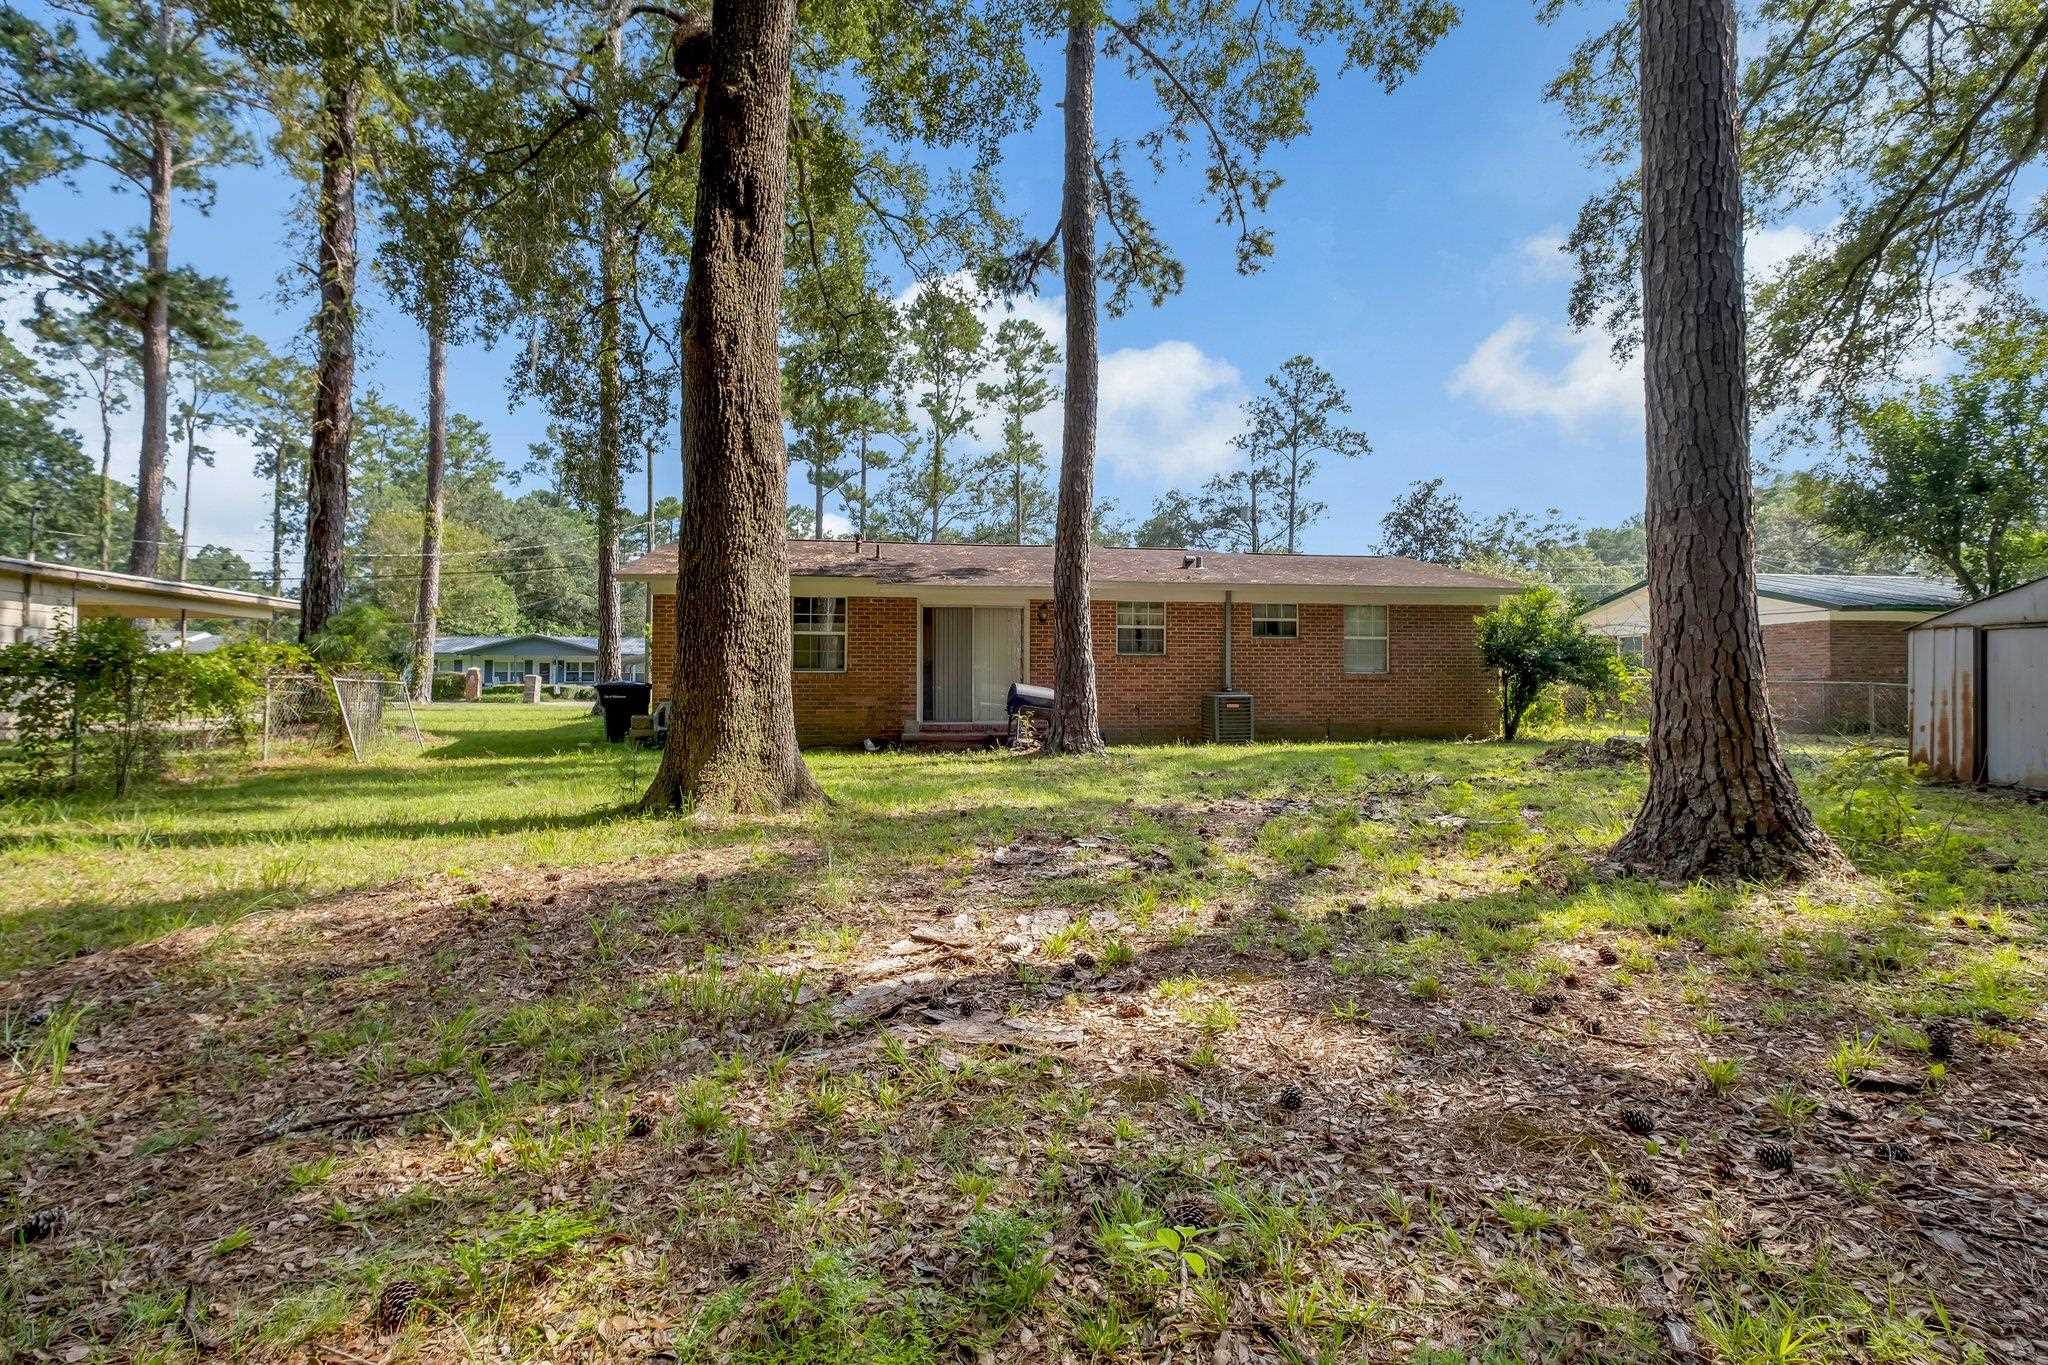 420 Dupont Drive,TALLAHASSEE,Florida 32305,3 Bedrooms Bedrooms,1 BathroomBathrooms,Detached single family,420 Dupont Drive,368546